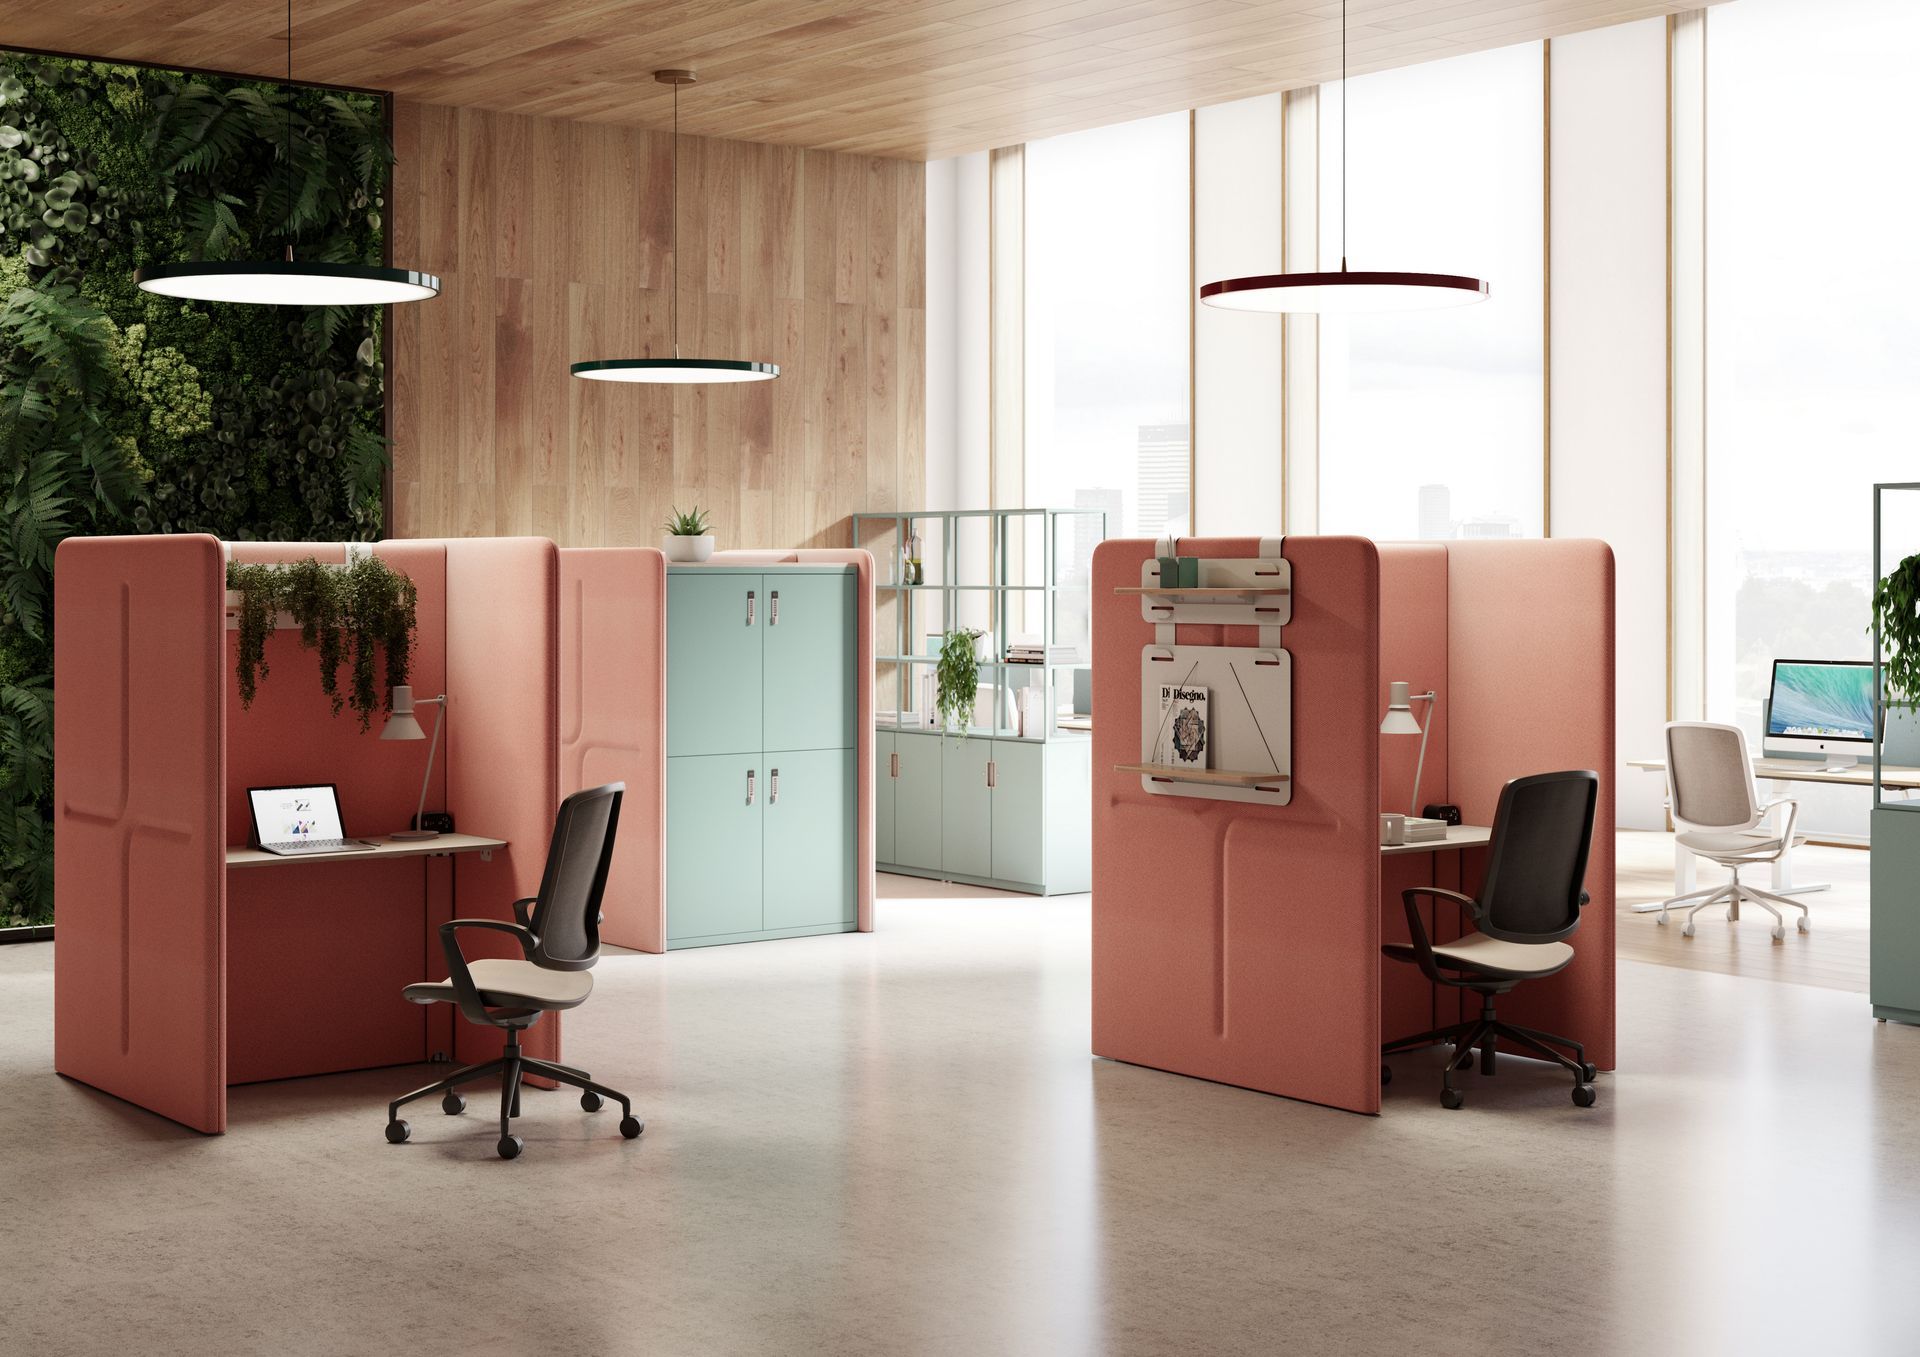 A spacious office with large windows letting in natural light. There are a few private booths in a peach-tone. At the booths are a laptop and chair. In the background are beautiful blue dividers with storage, plants and books. 